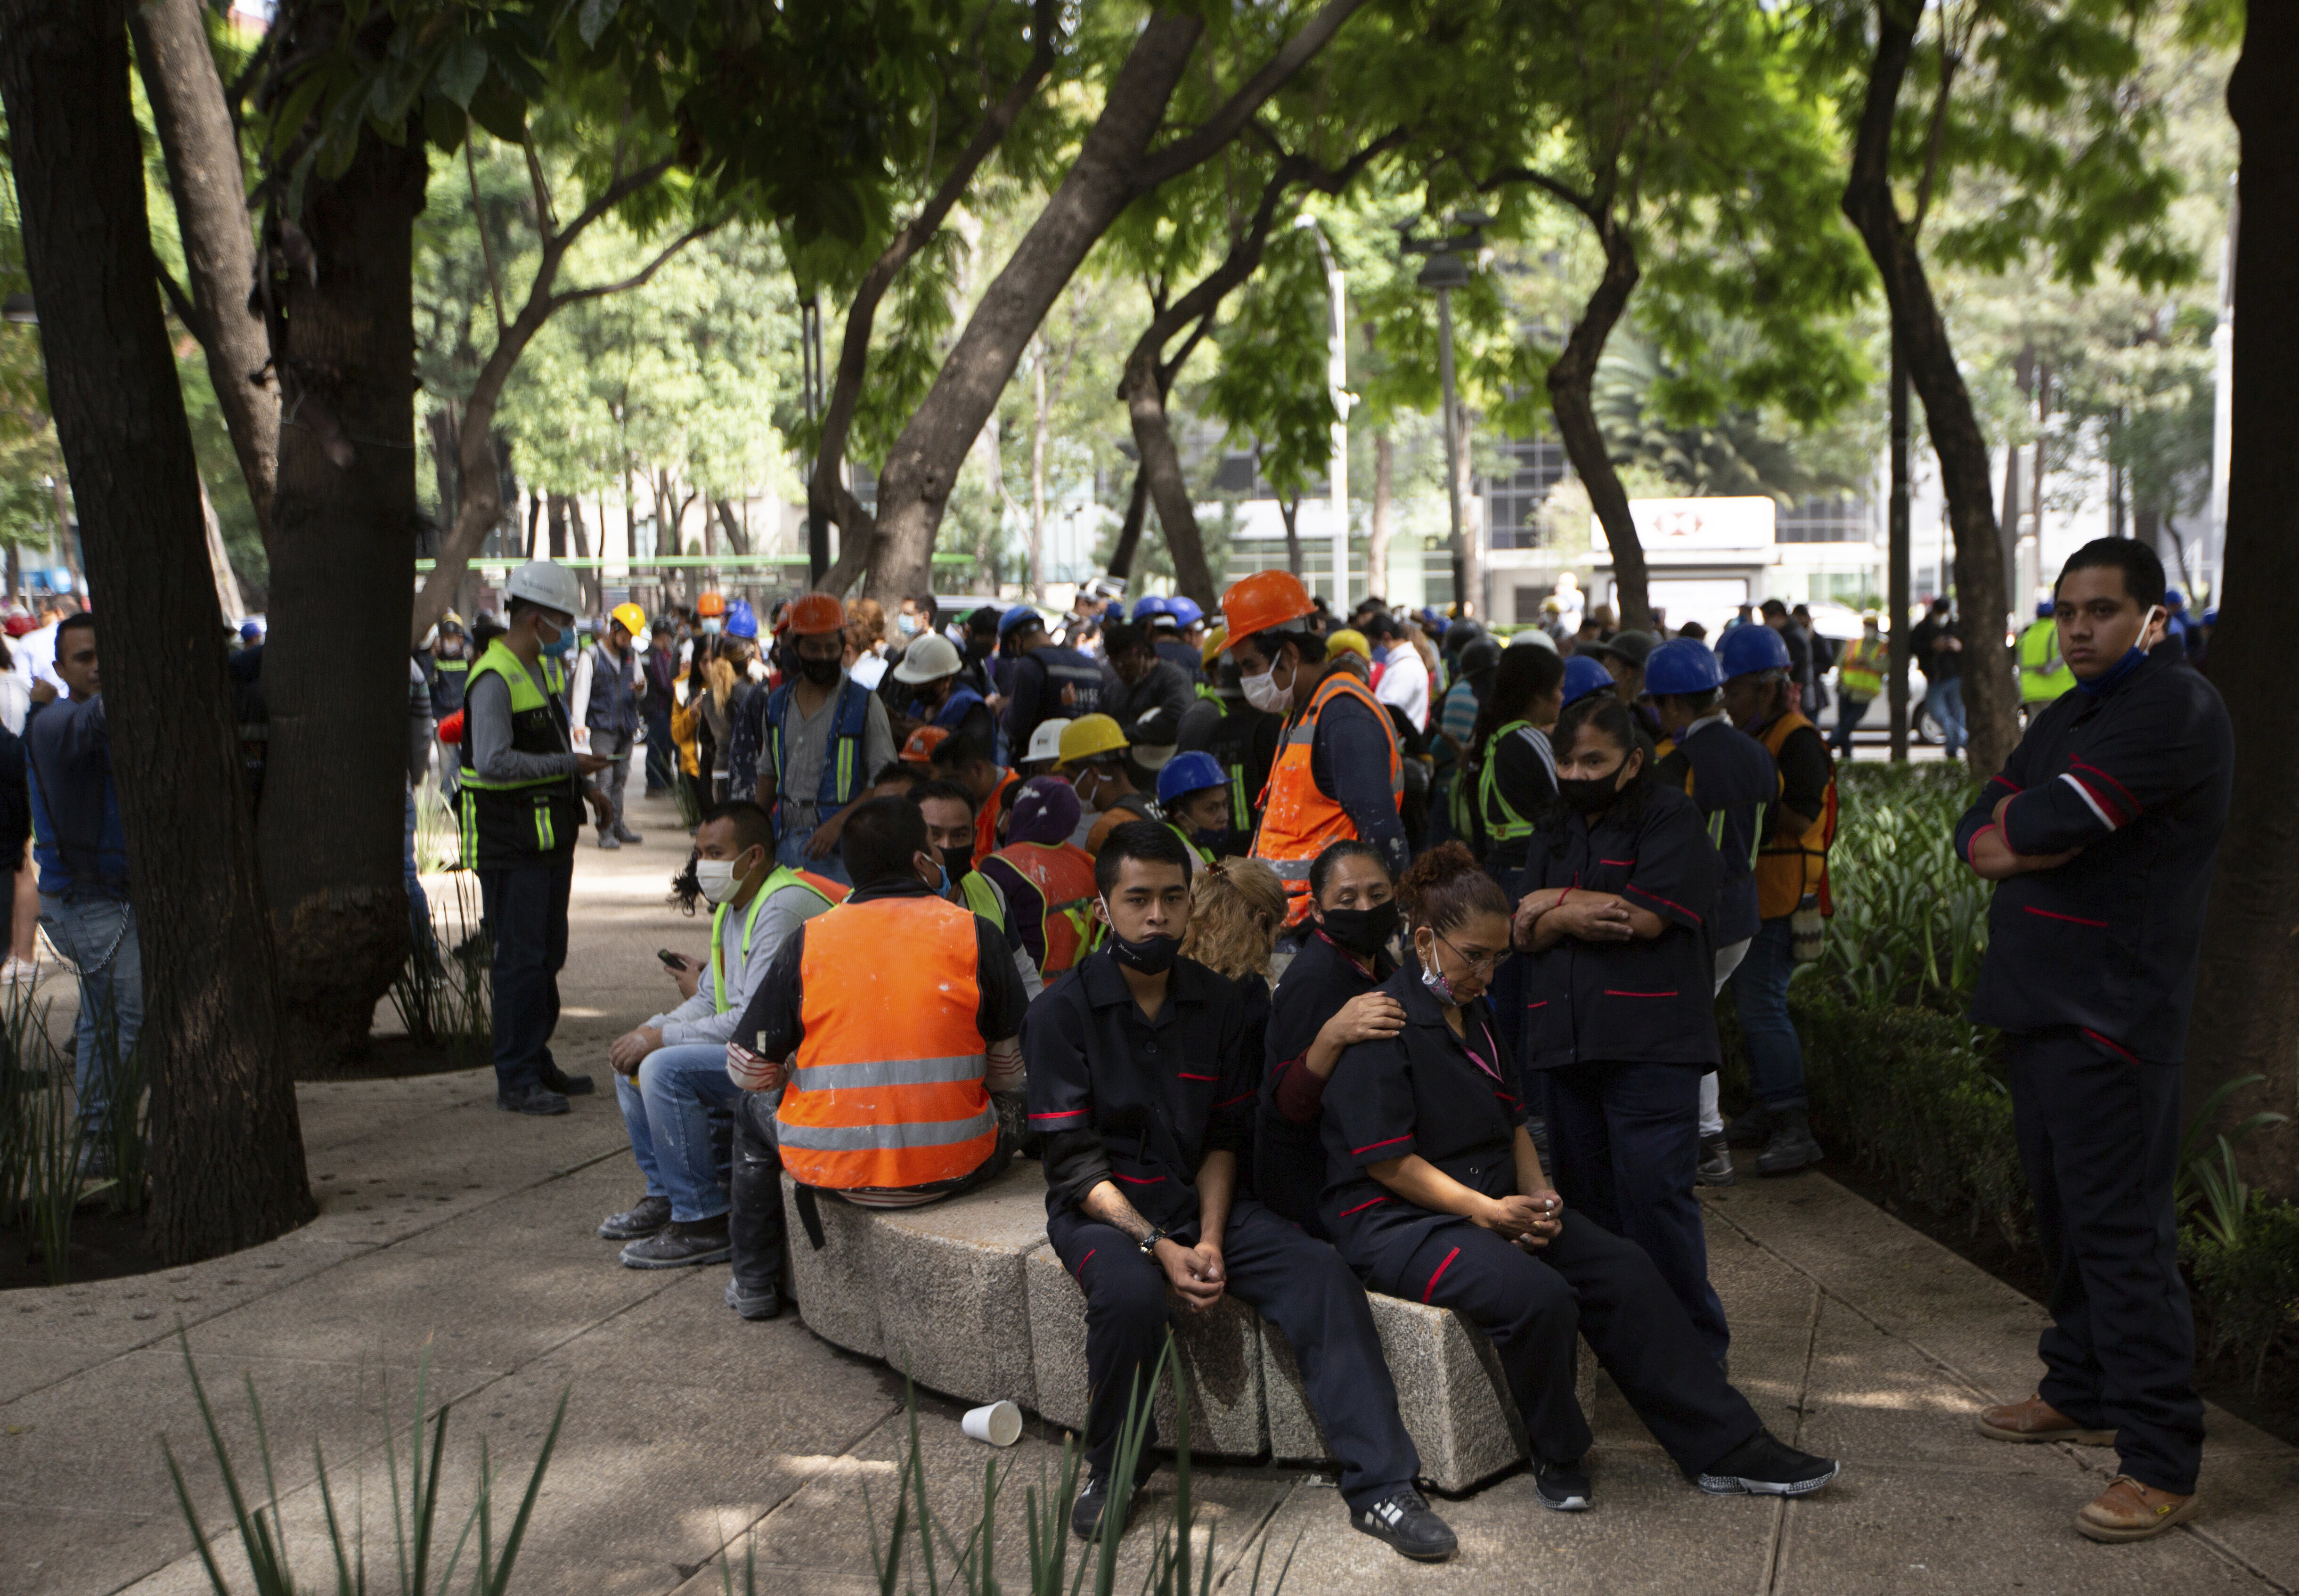 Employees gather outside of their work building after a 7.5 earthquake, in Mexico City, Tuesday, June 23, 2020. The earthquake centered near the resort of Huatulco in southern Mexico swayed buildings Tuesday in Mexico City and sent thousands into the streets.(AP Photo/Fernando Llano)